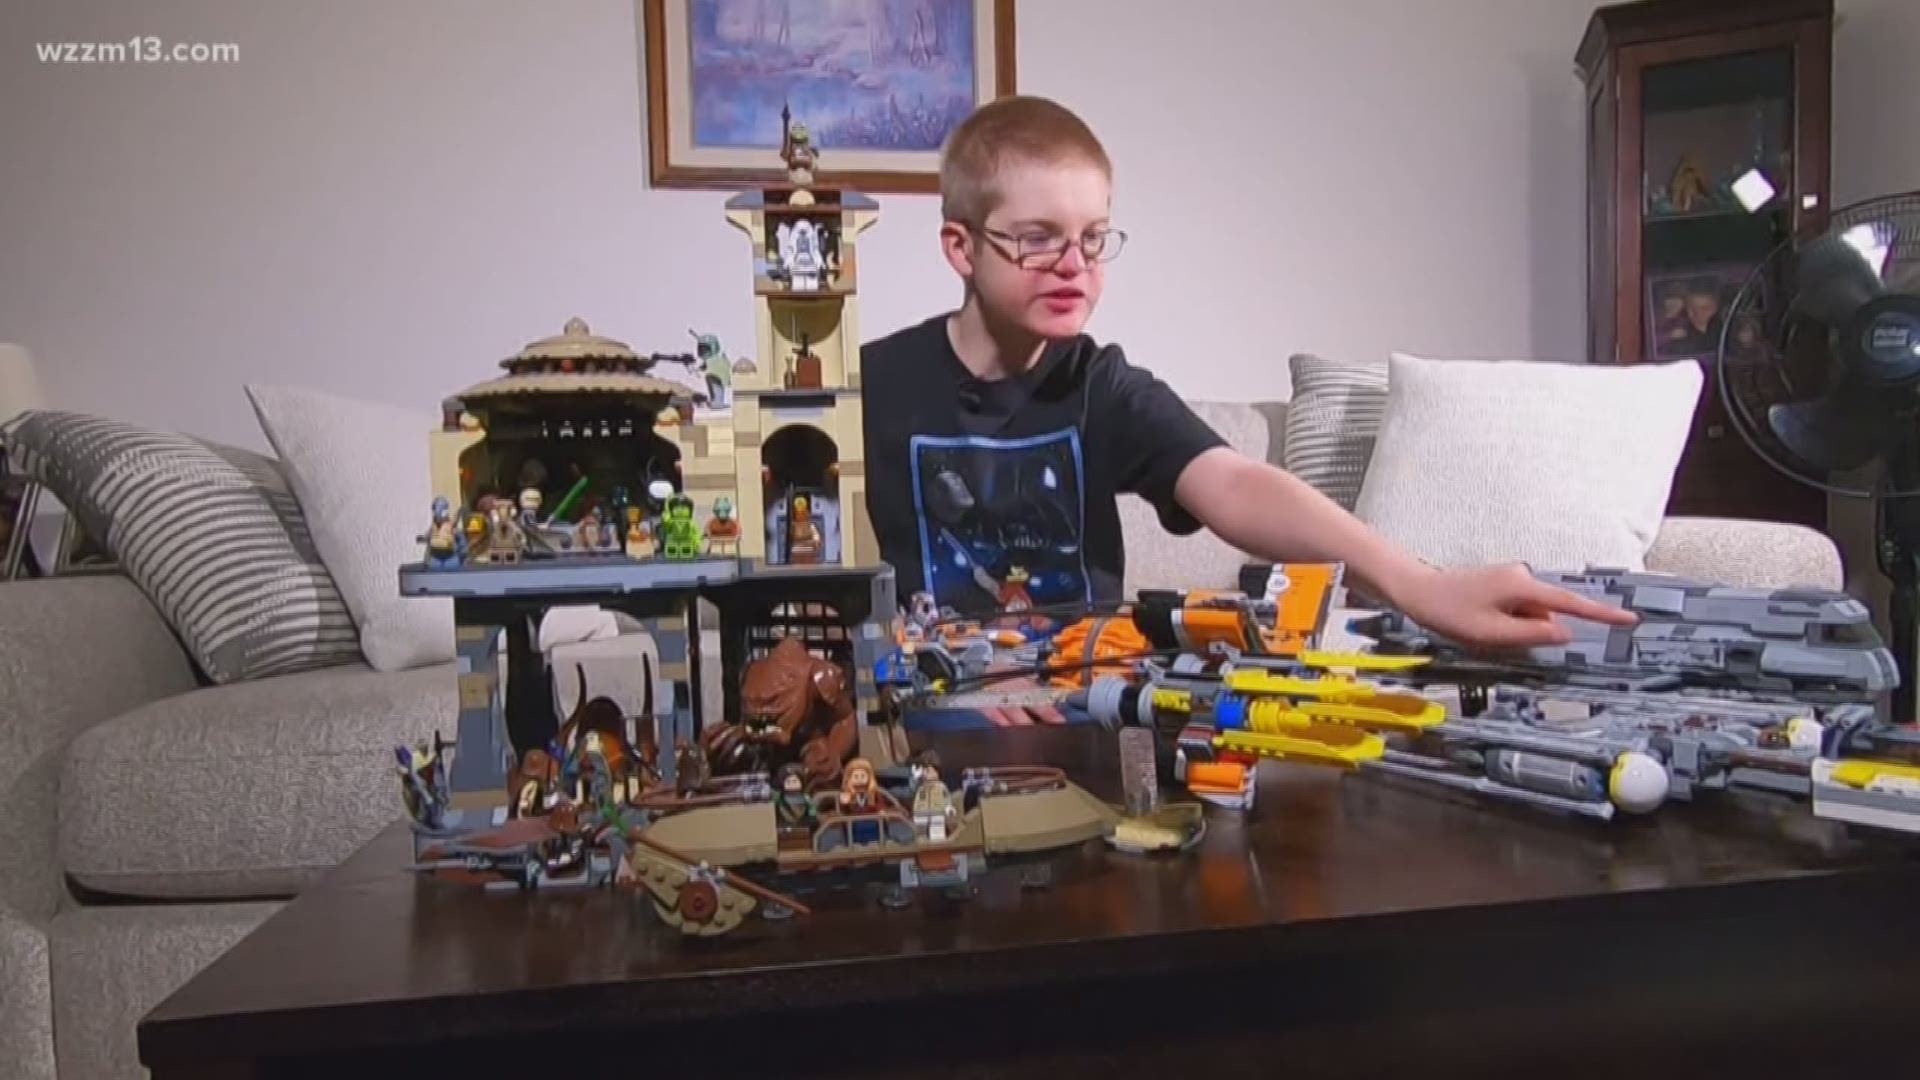 Boy hopes for 'Force Push' in competition